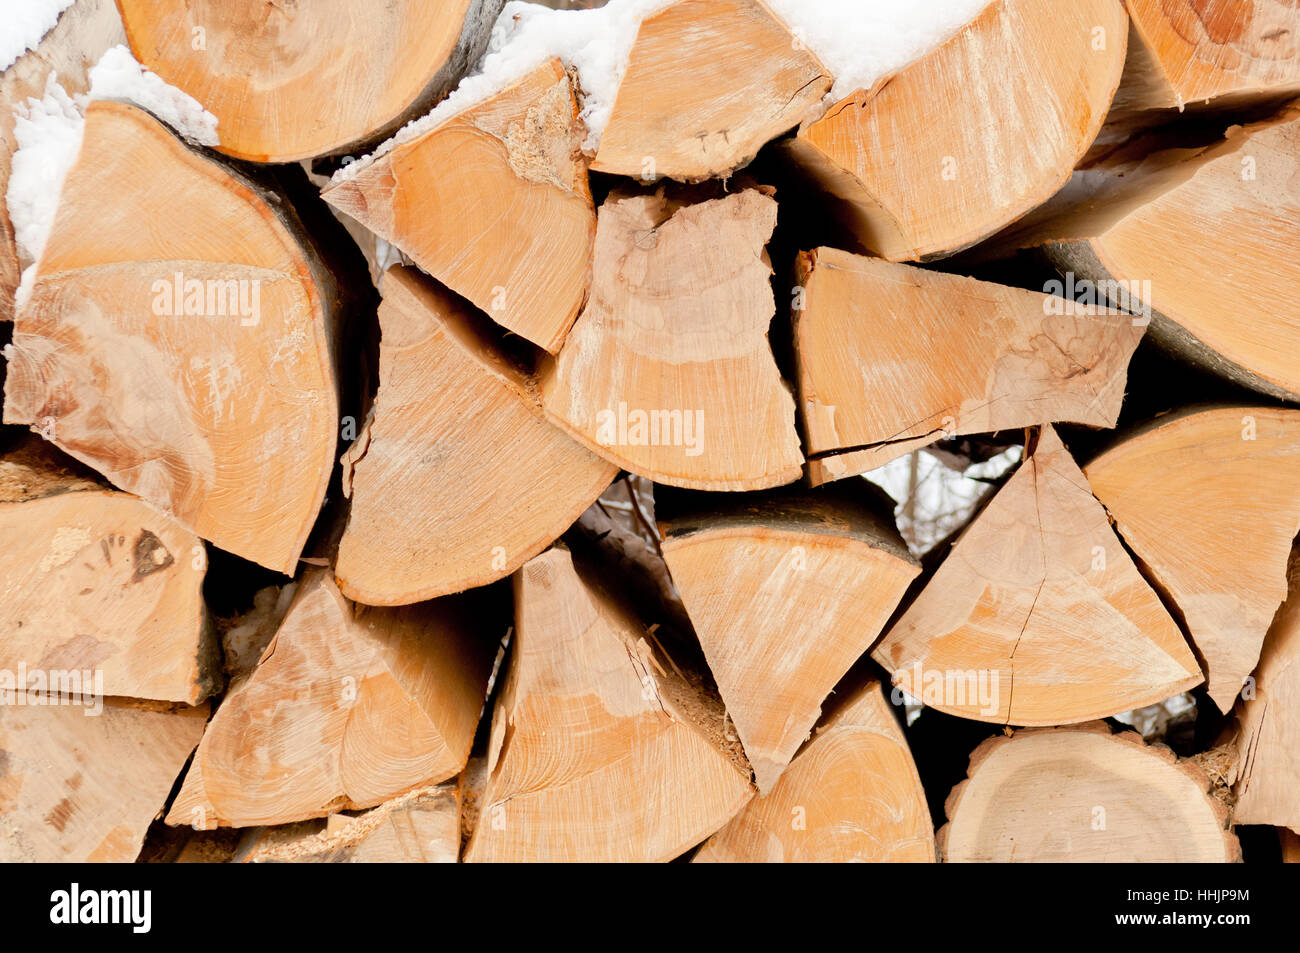 Natural wooden background, chopped firewood on stack Stock Photo